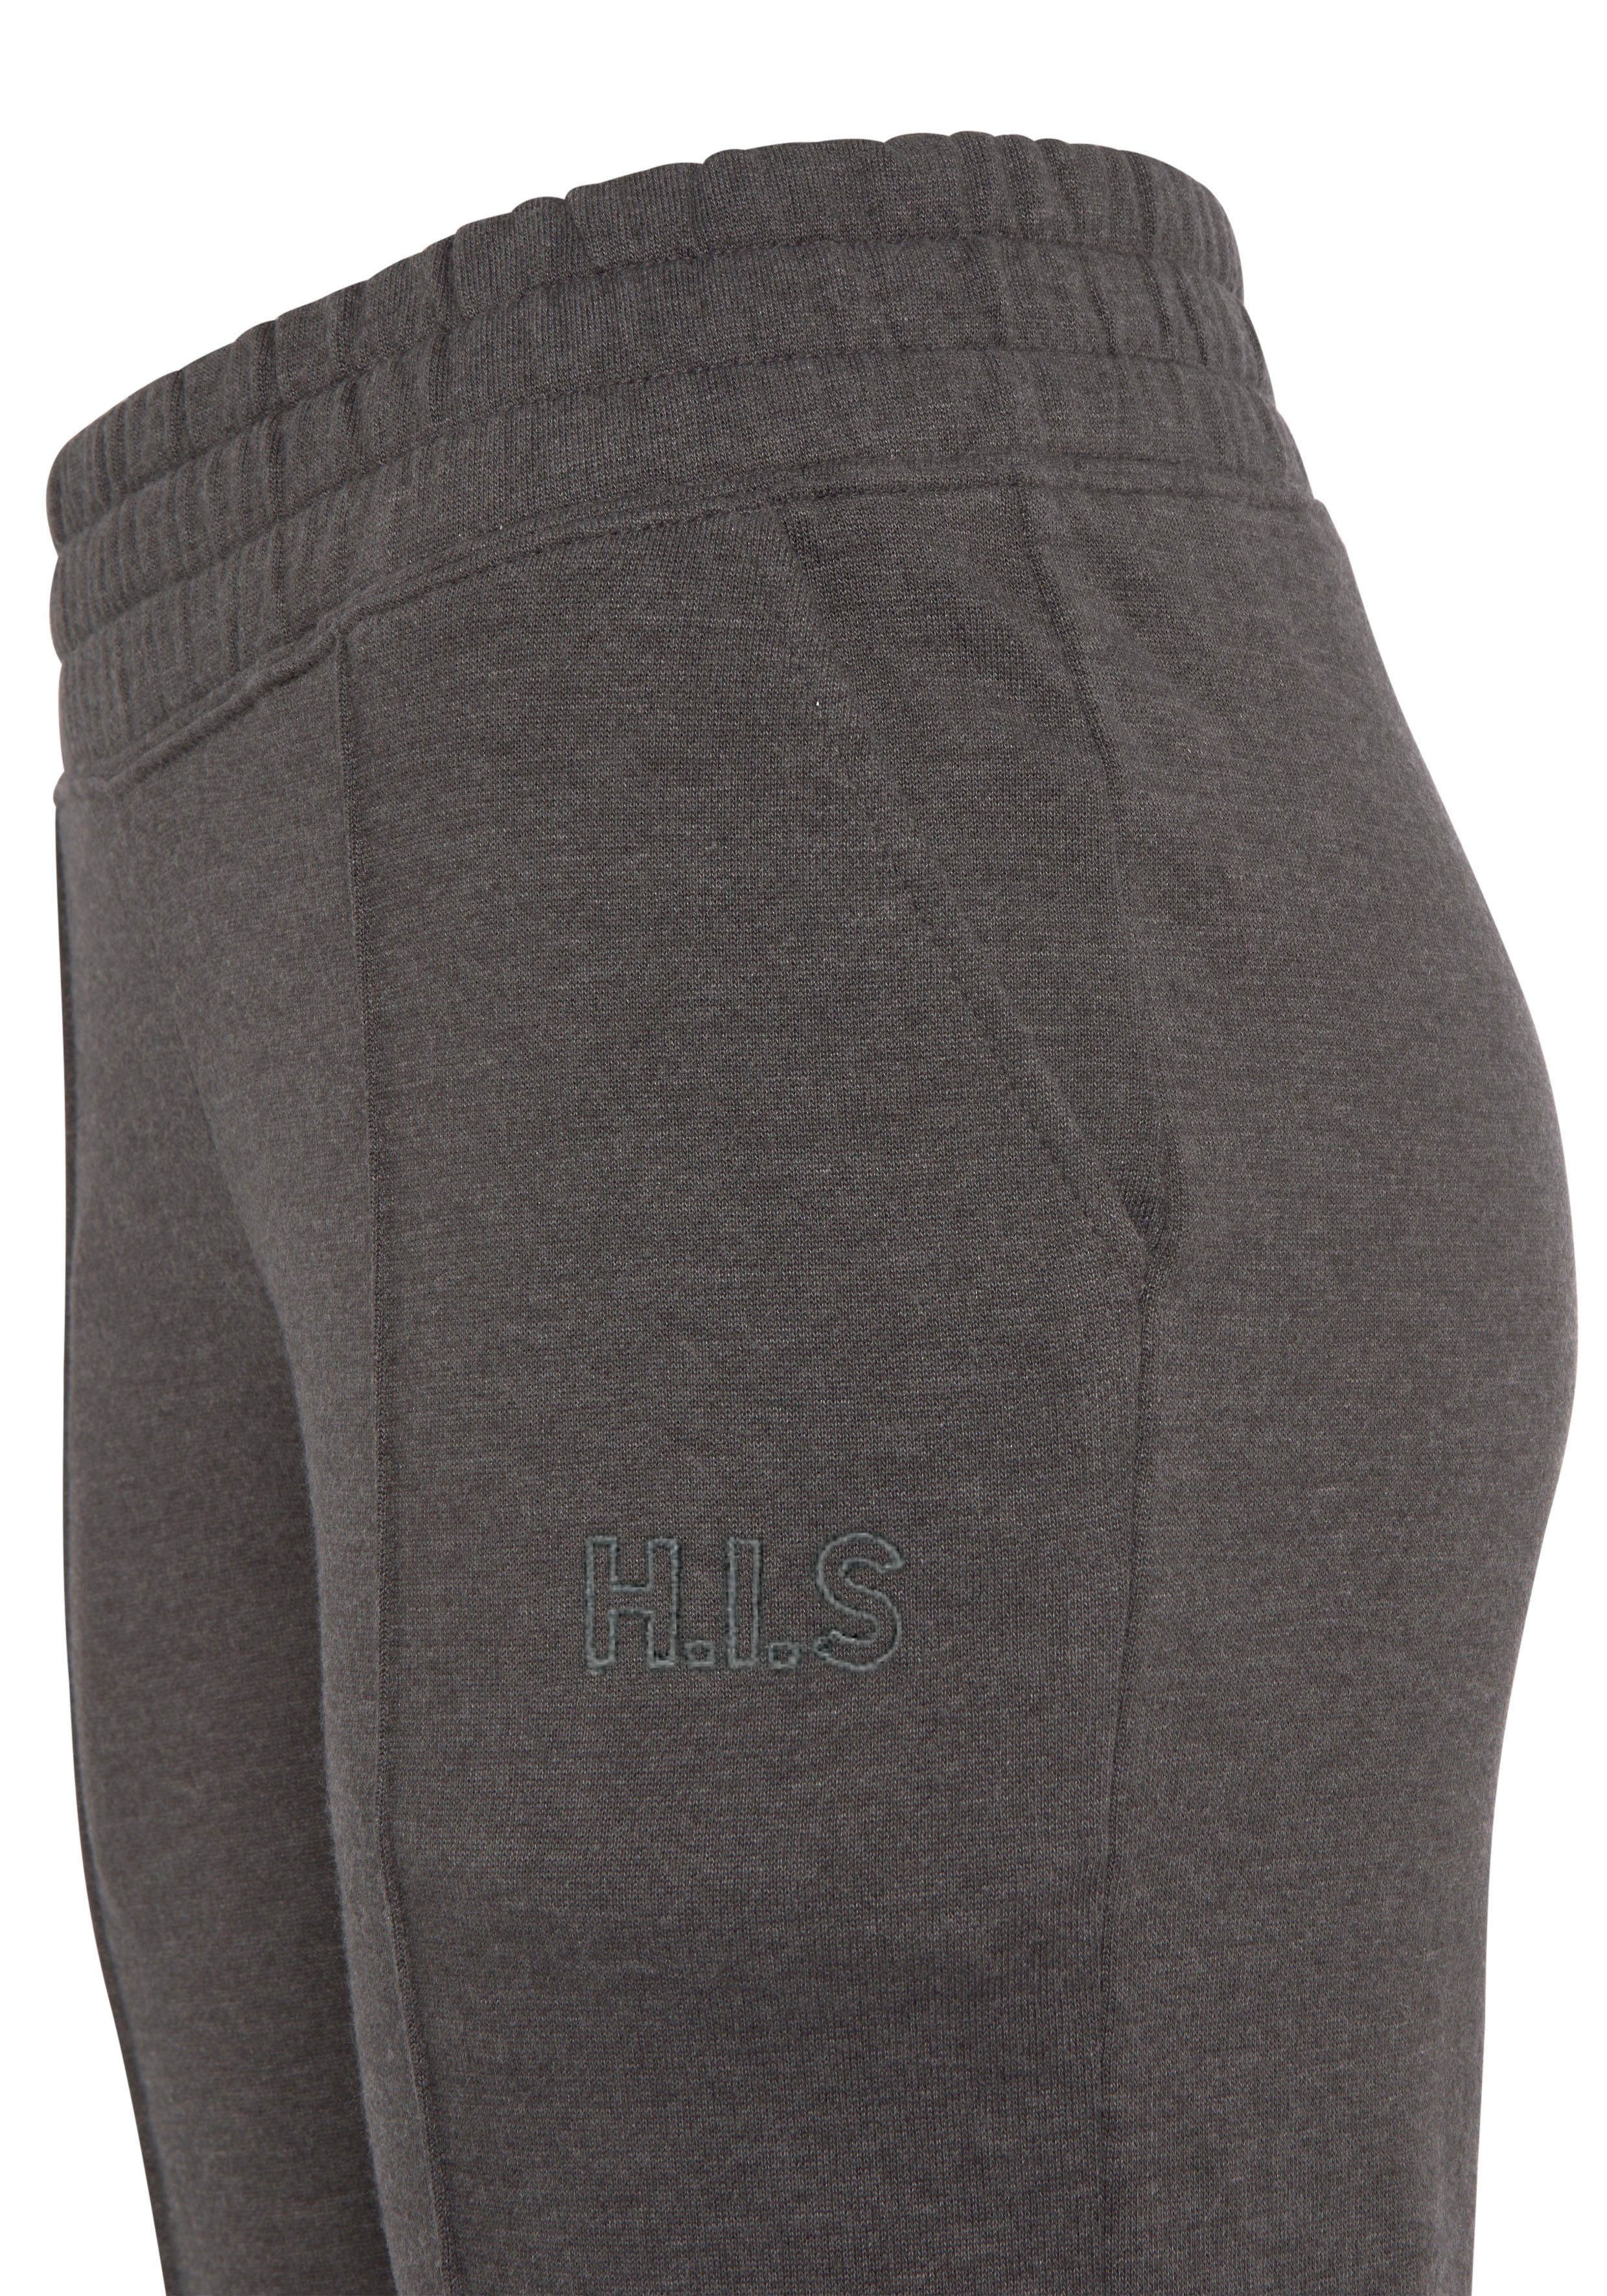 anthrazit meliert H.I.S Relaxhose vorn, Loungeanzug mit Piping